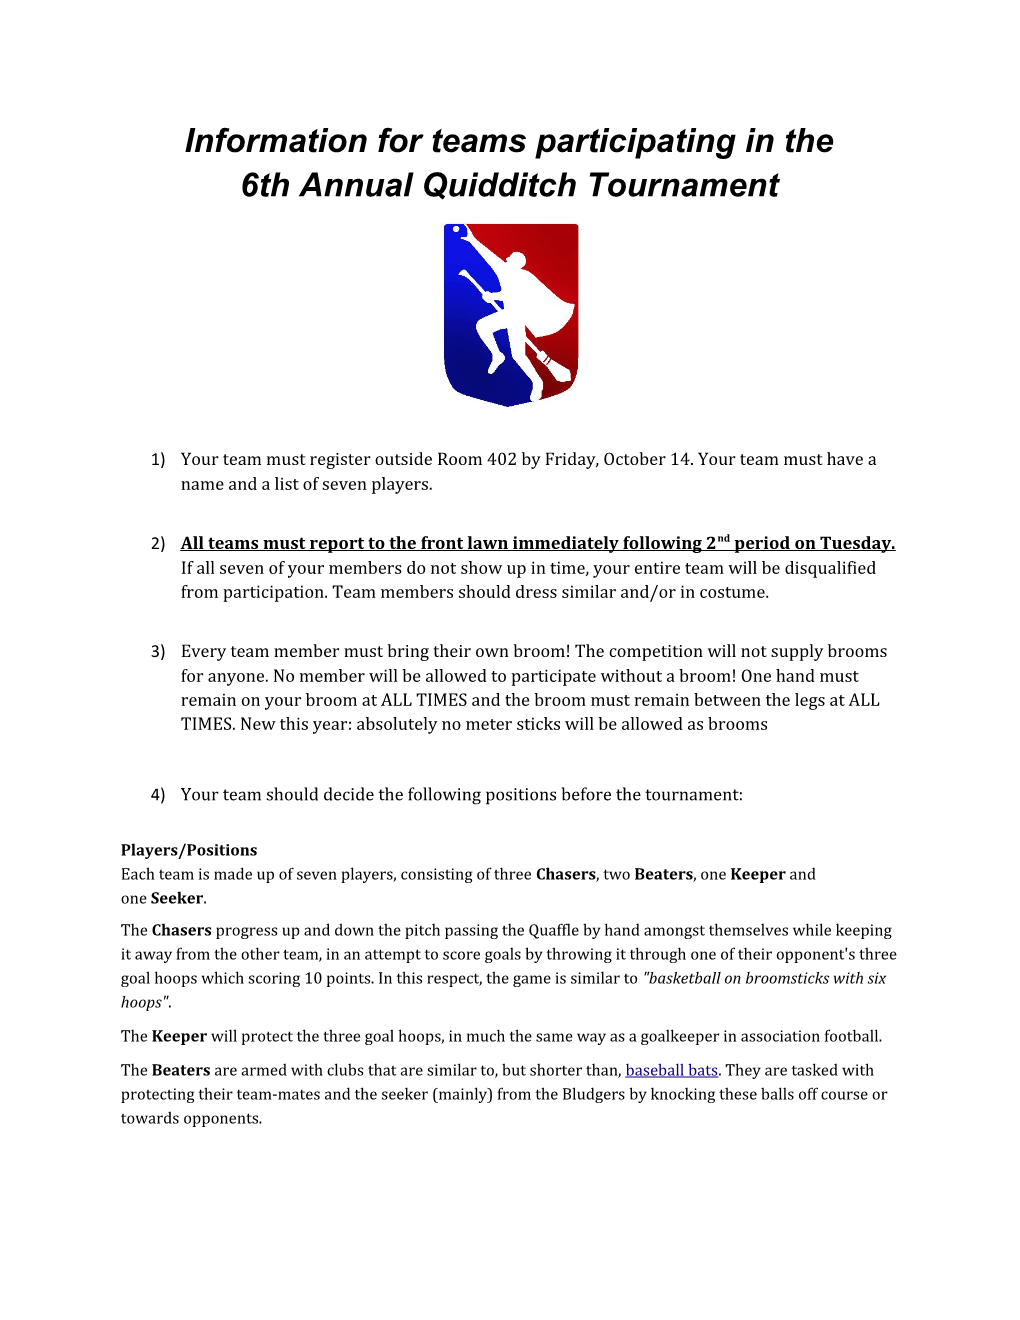 Information for Teams Participating in The